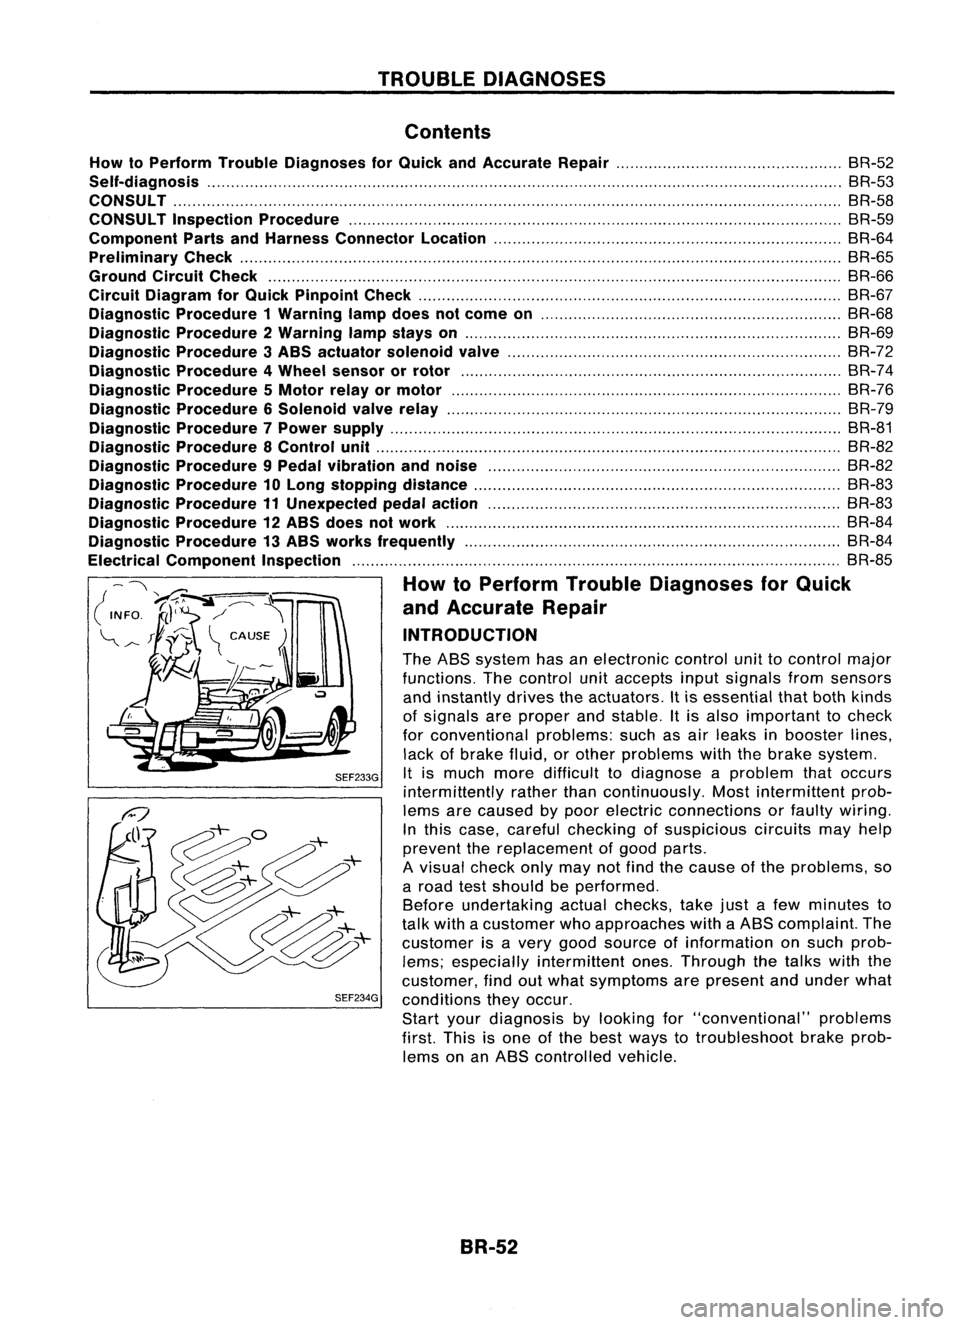 NISSAN ALMERA N15 1995  Service Manual TROUBLEDIAGNOSES
Contents
How toPerform TroubleDiagnoses forQuick andAccurate Repair SR-52
Self-diagnosis SR-53
CONSULT BR-58
CONSULT Inspection Procedure BR-59
Component PartsandHarness Connector Loc